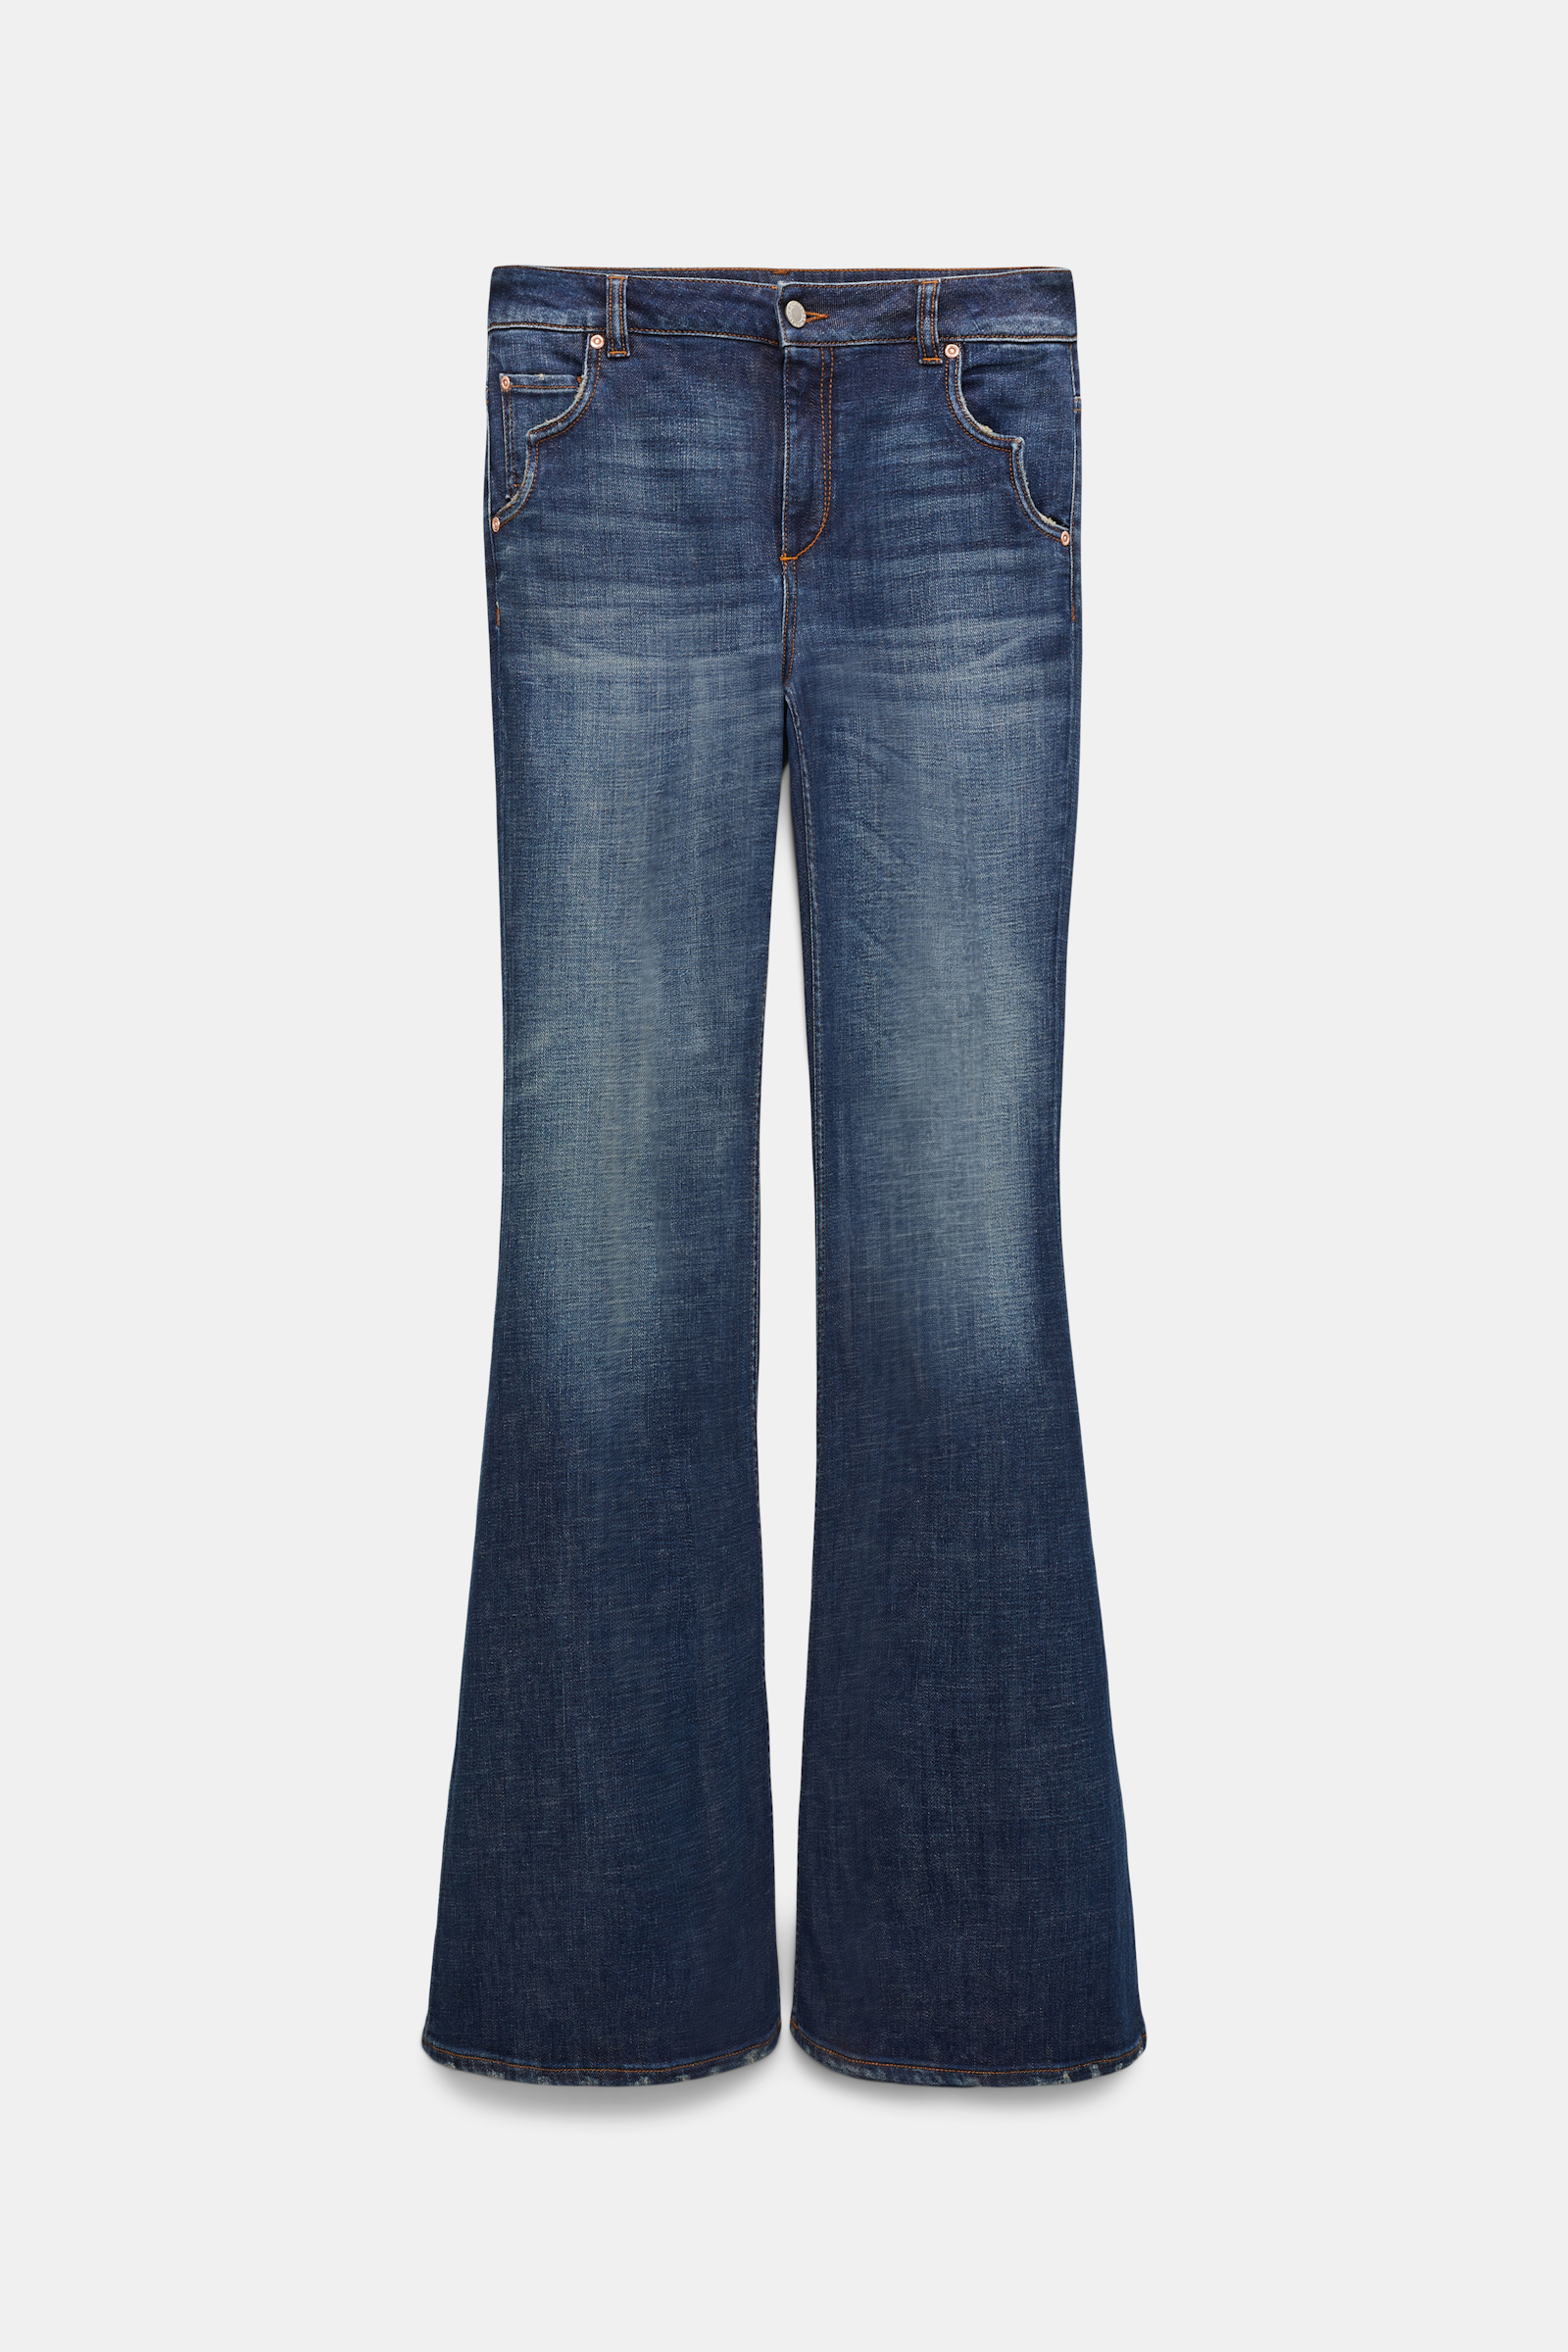 Dorothee Schumacher Extra long flared jeans with Western details denim blue